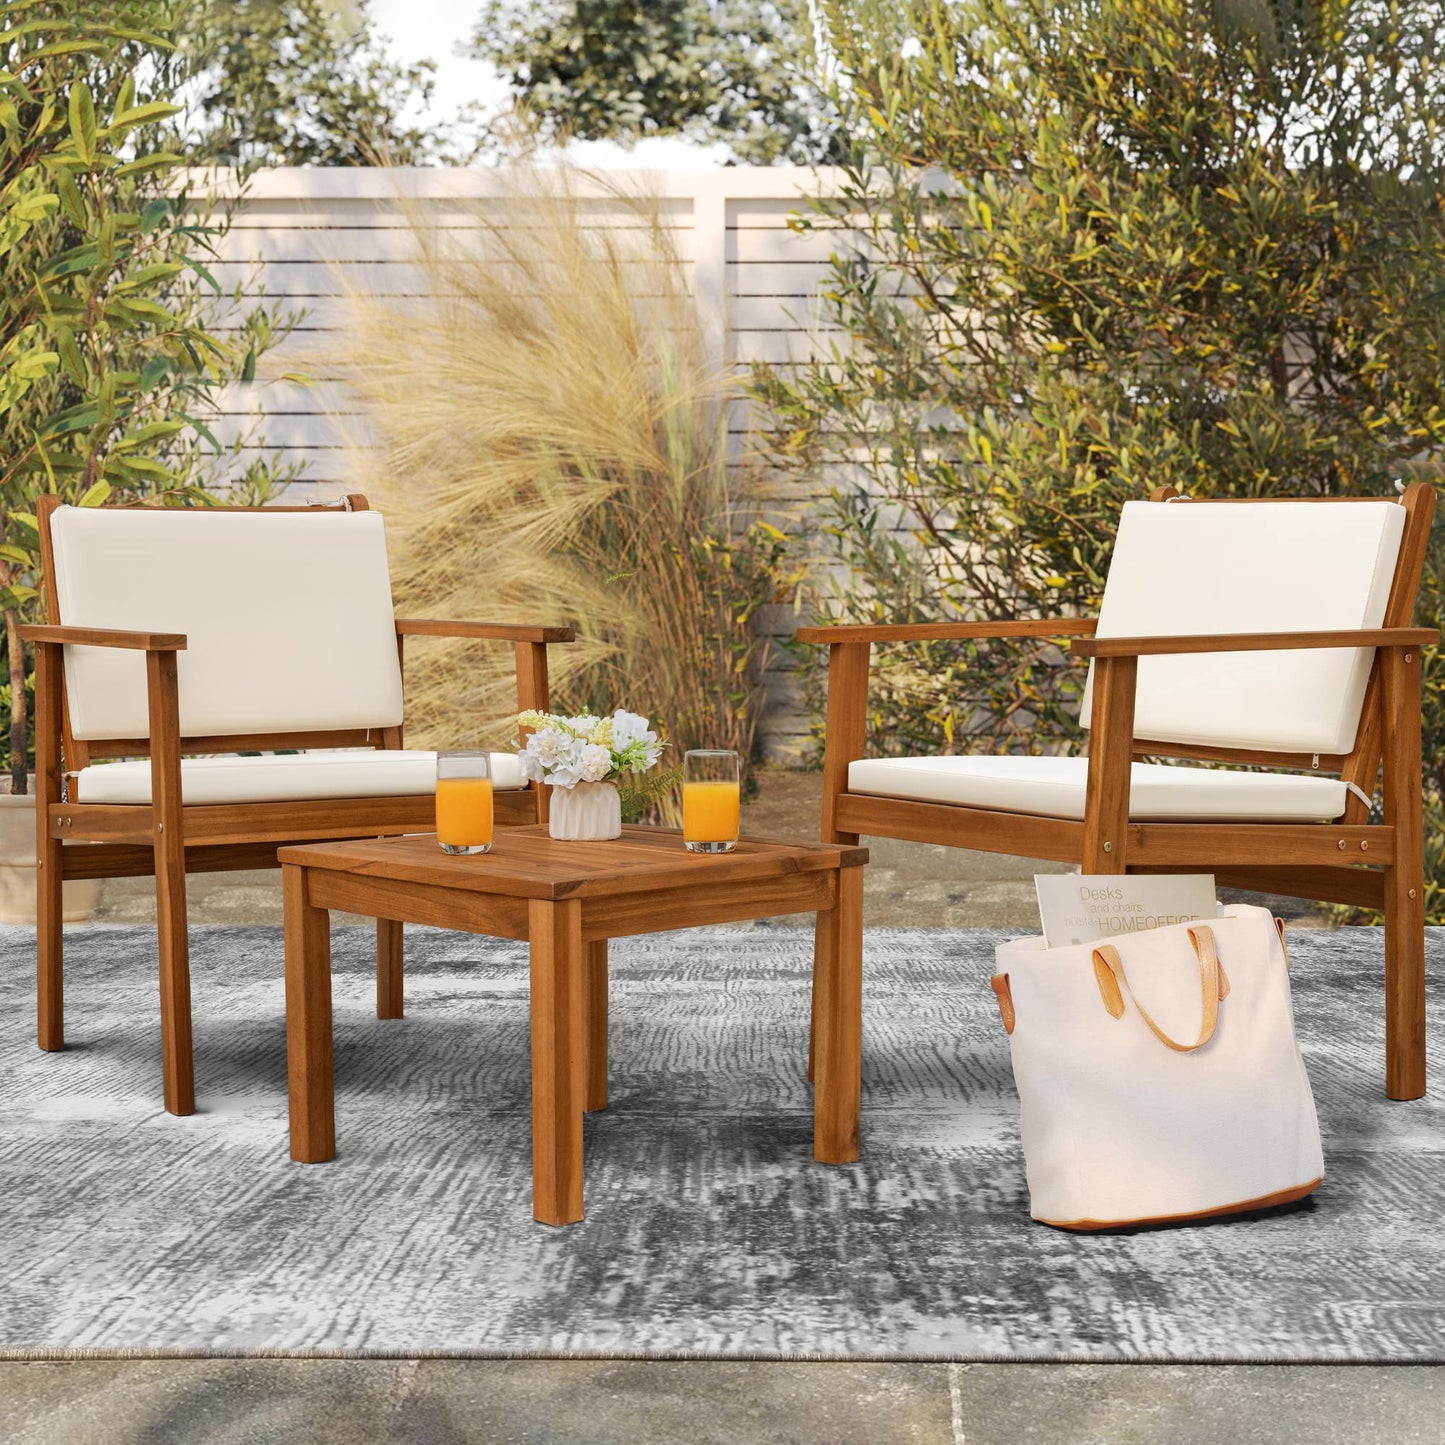 Flamaker Patio Chairs 3 Piece Acacia Wood Patio Furniture with Coffee Table & Cushions Outdoor Conversation Set Balcony Chairs for Porch, Deck,